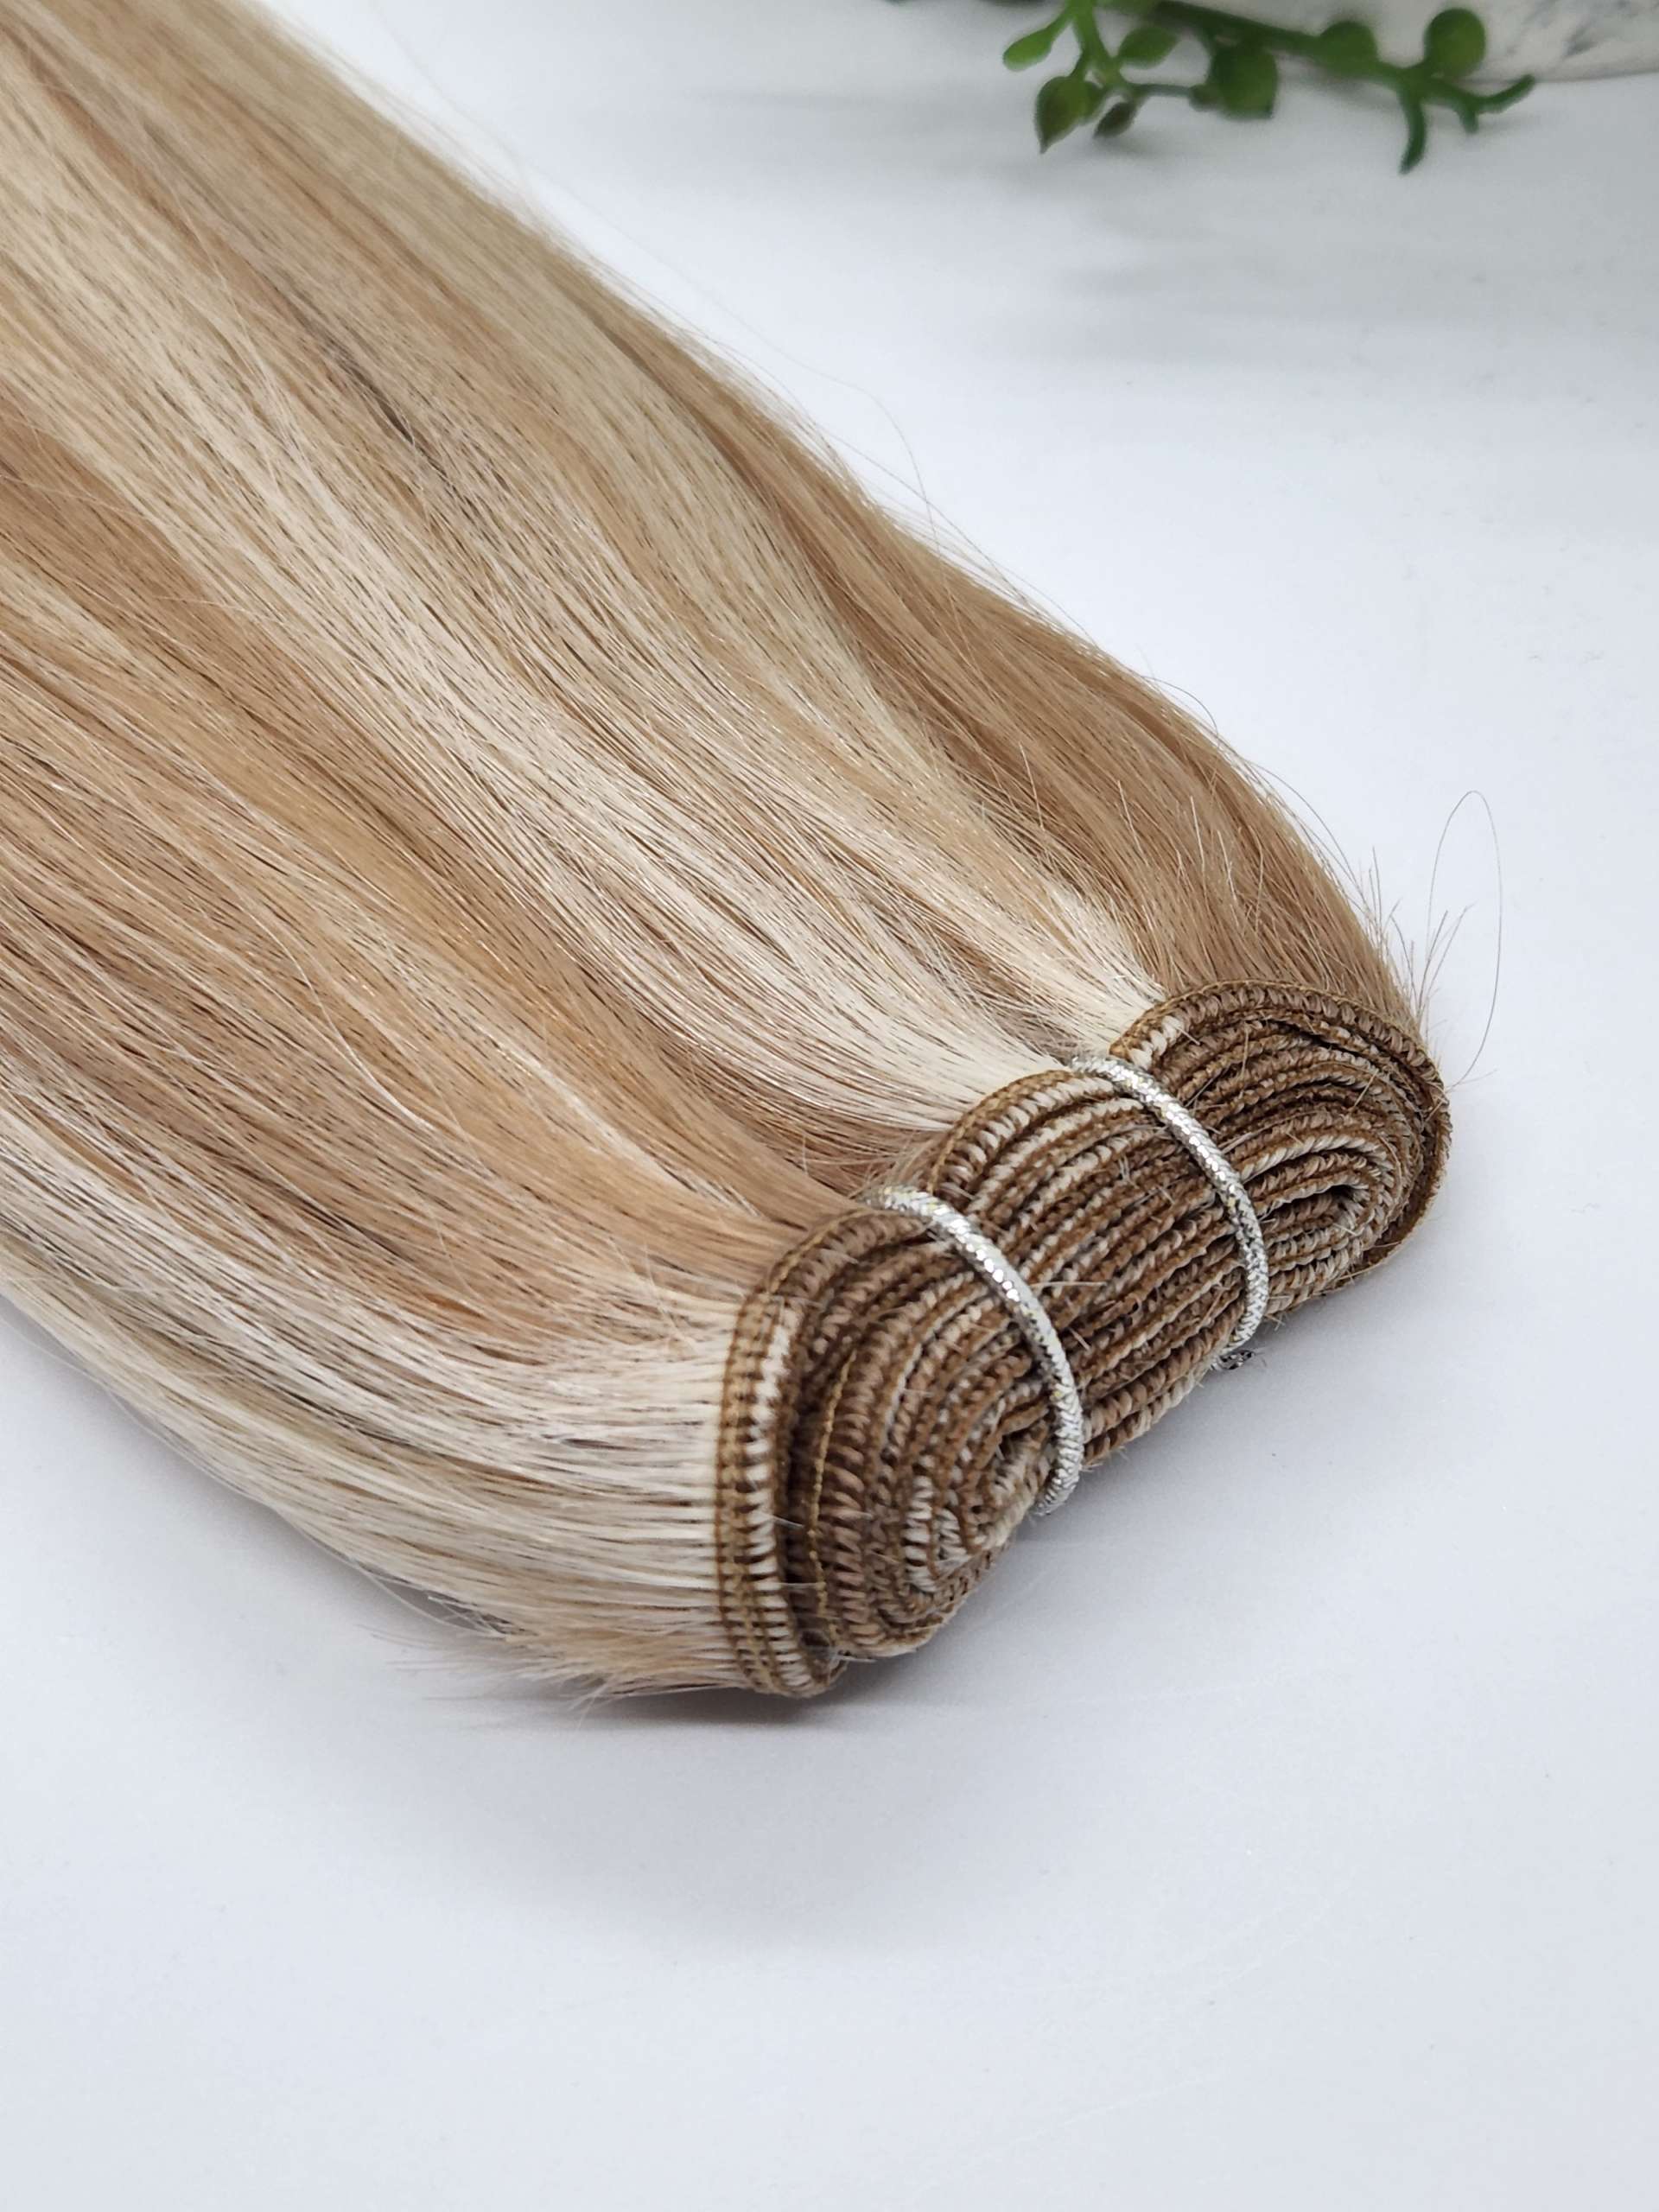 18/60 Foiled Dark Blonde with Lightest Blonde Russian Weft Hair Extensions  20-22